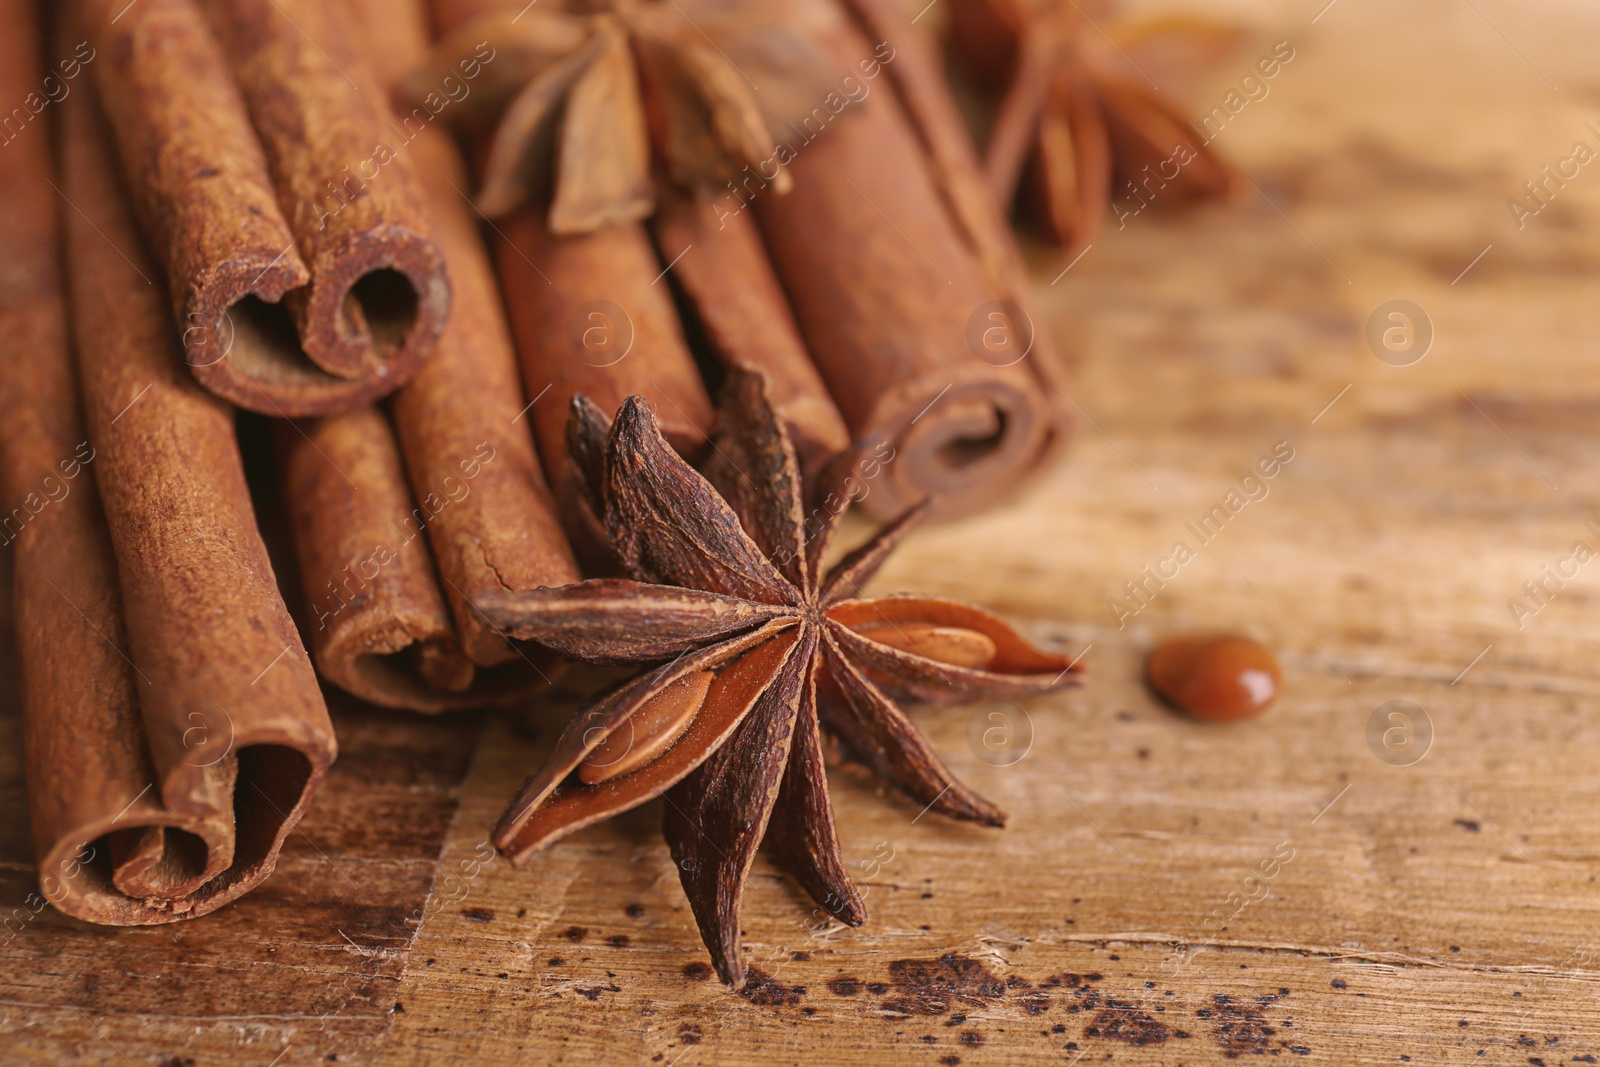 Photo of Cinnamon sticks with anise on wooden table